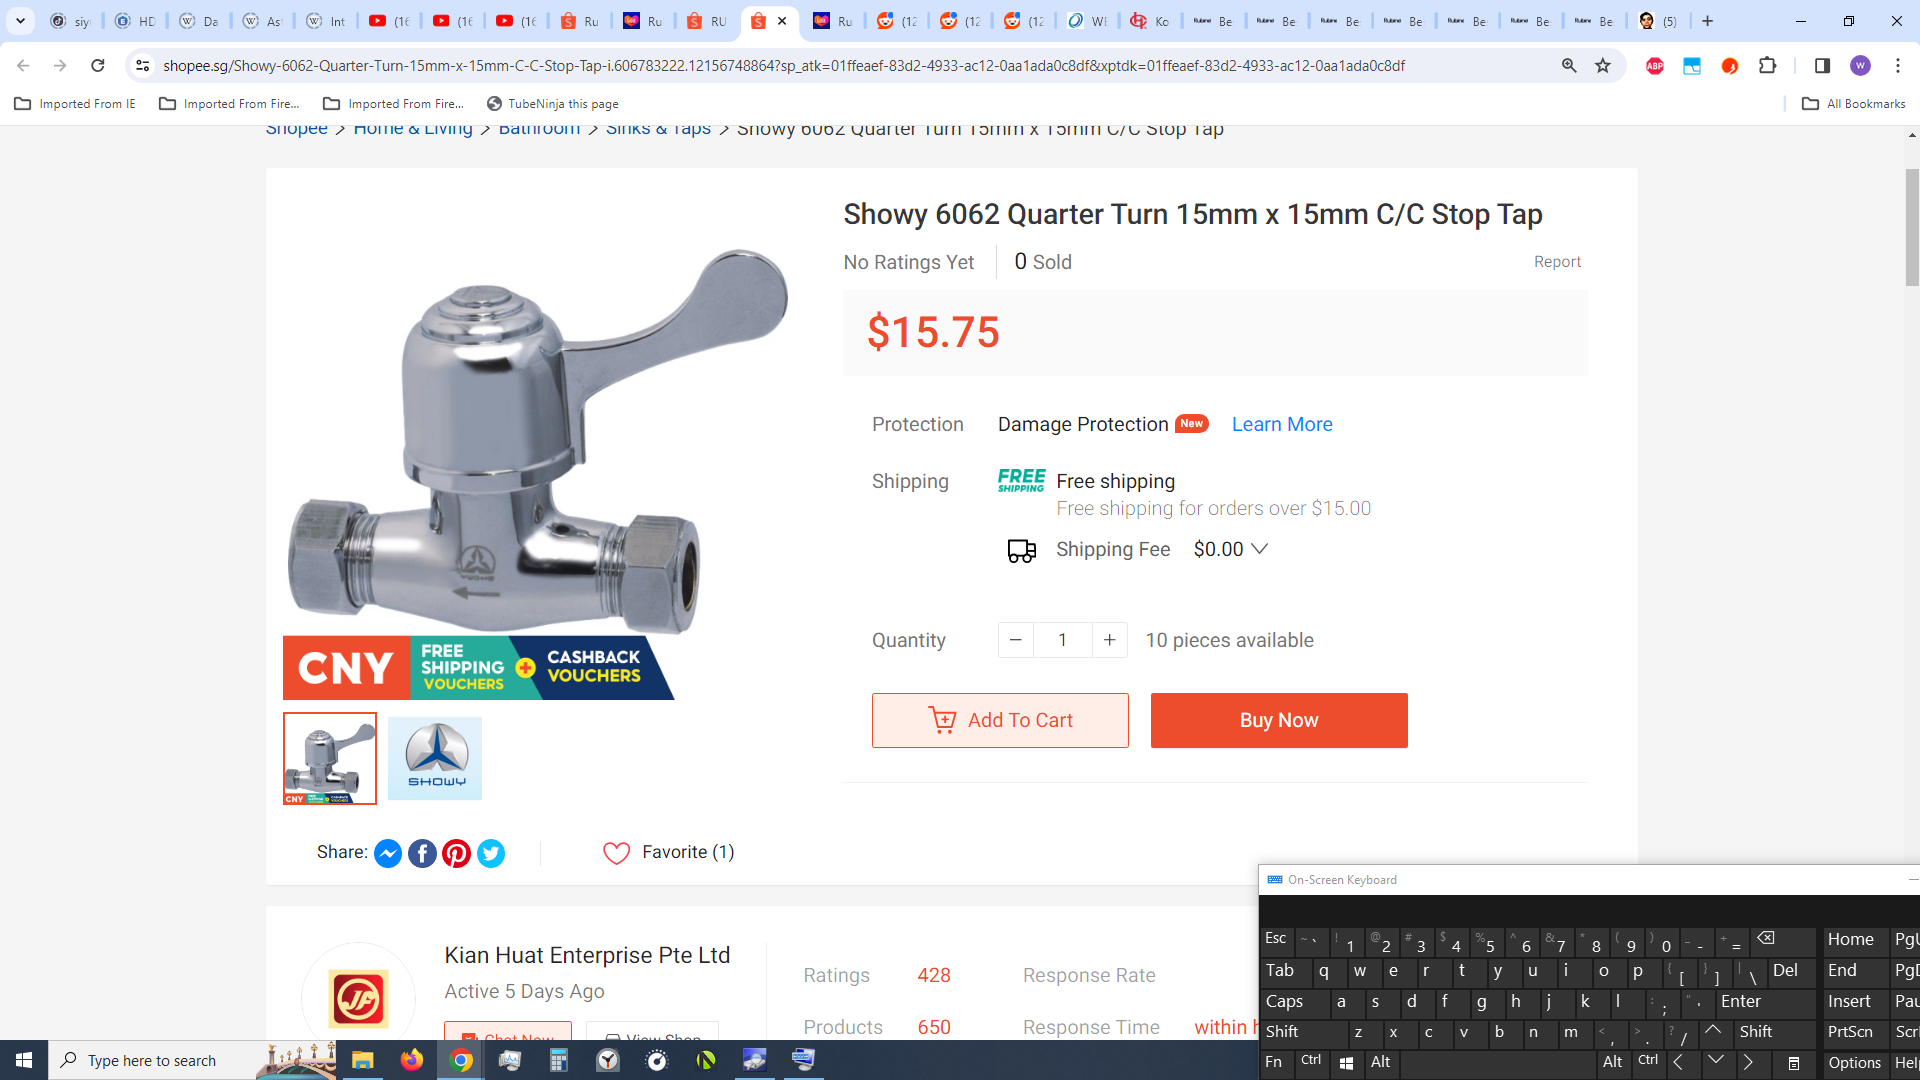 Showy stopcock (Shopee).png